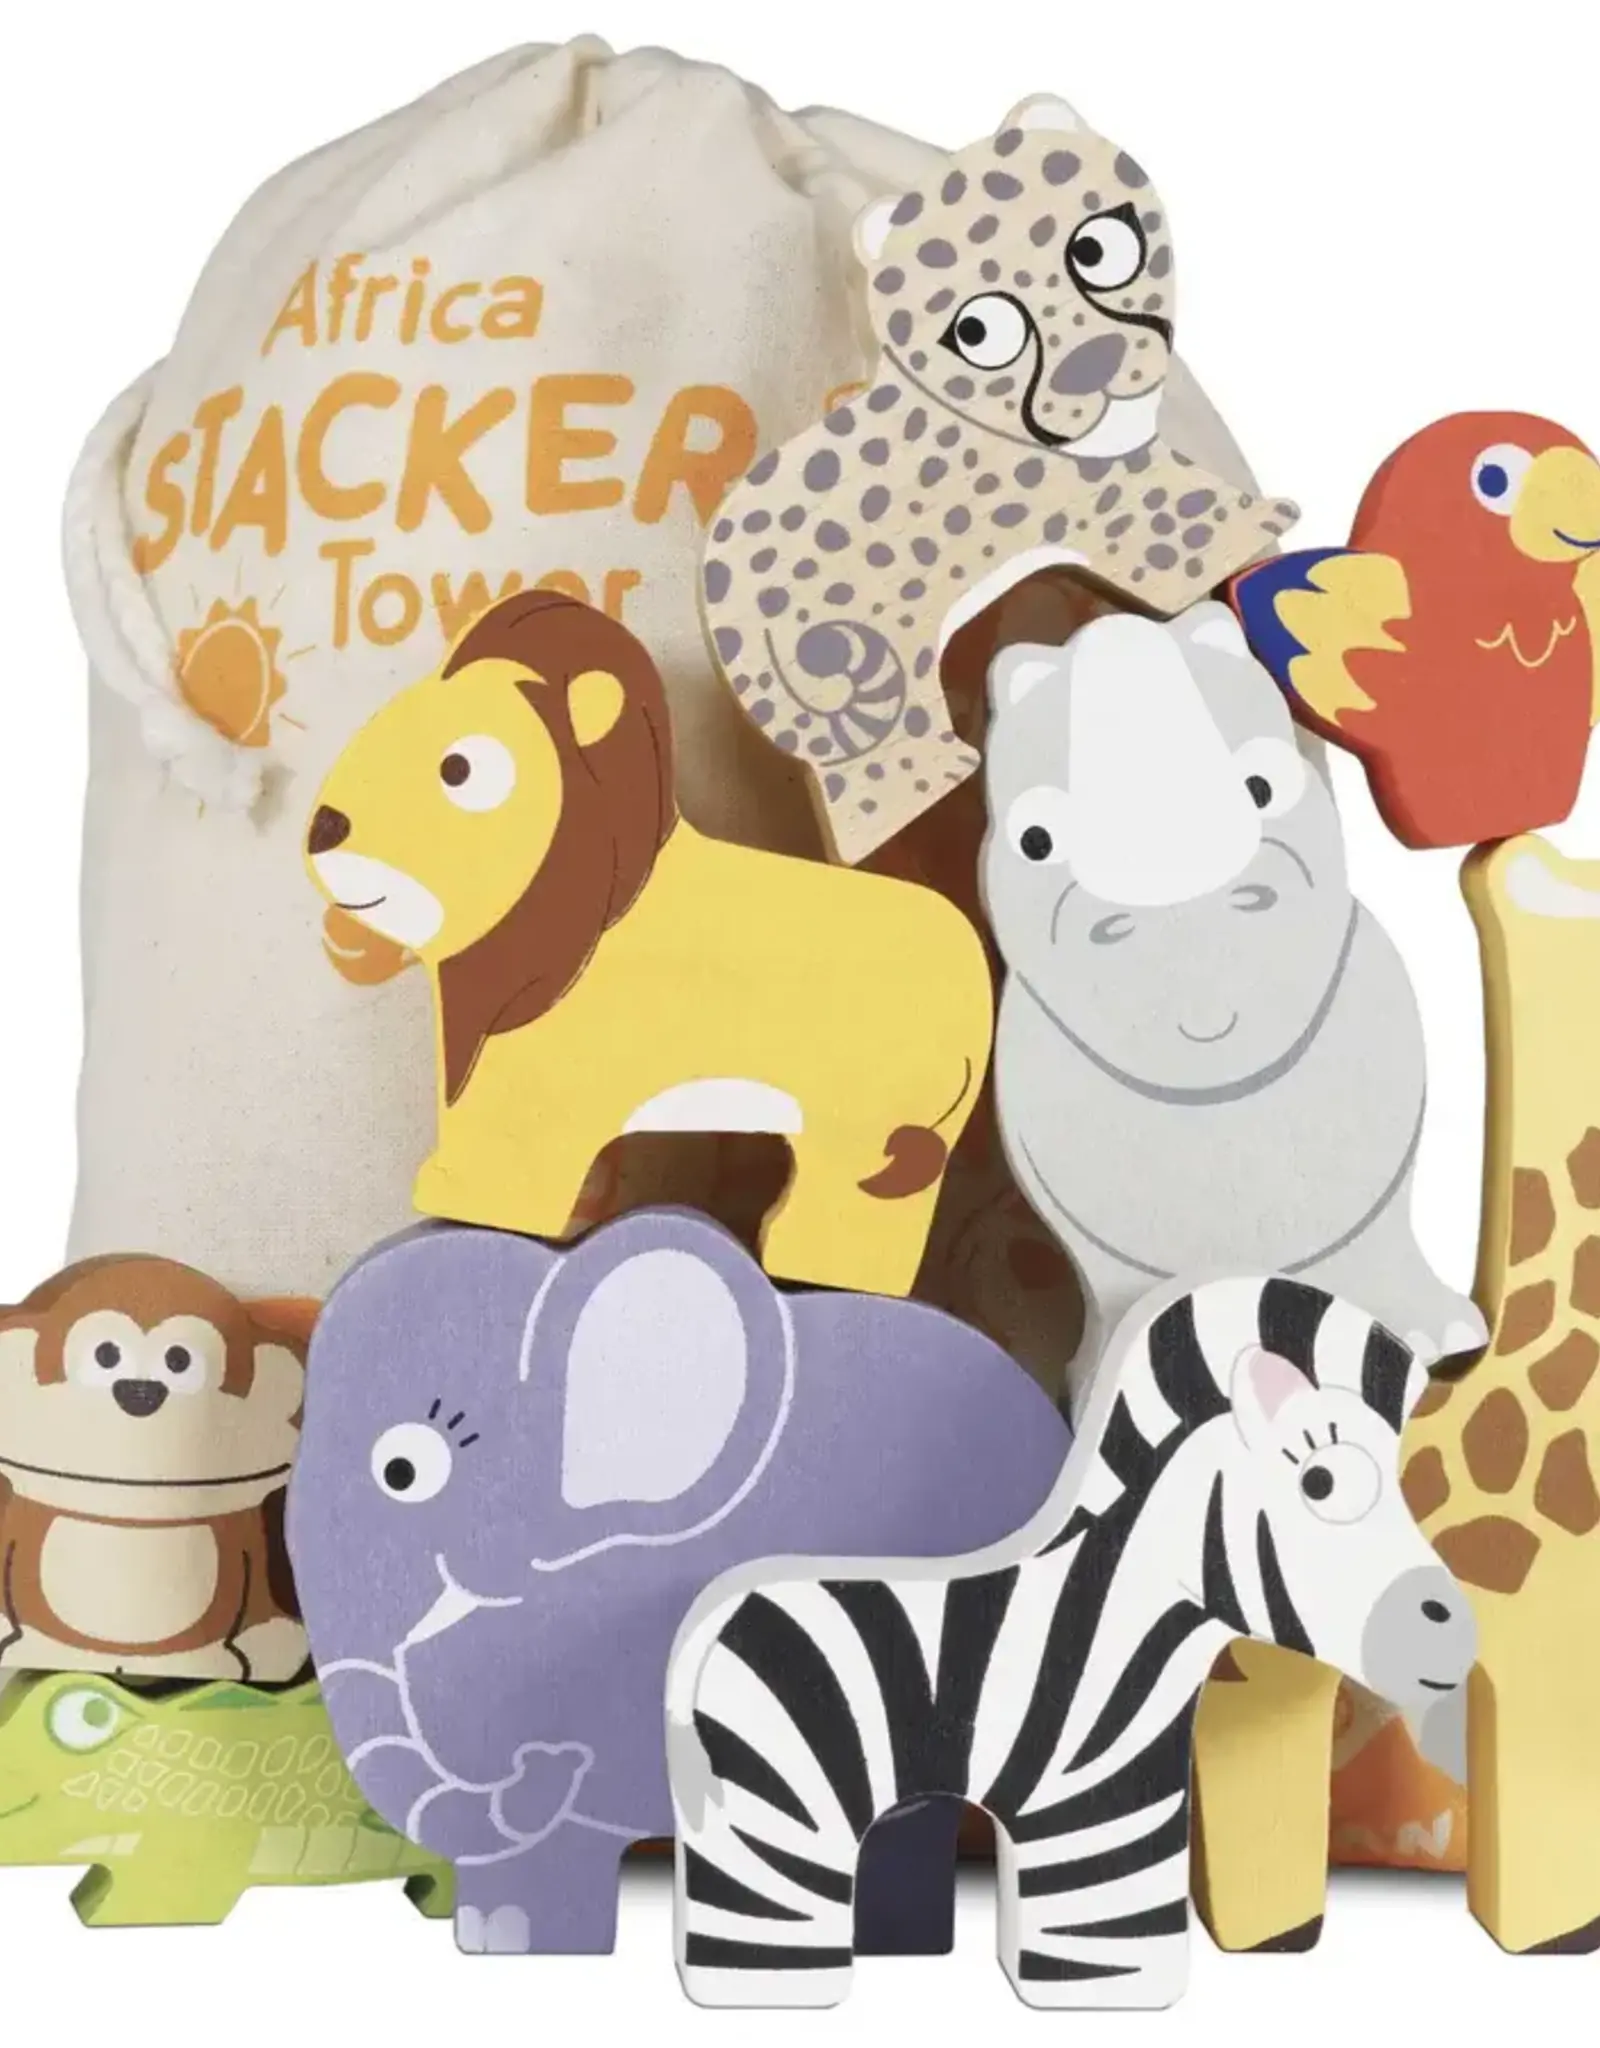 Le Toy Van Wooden Africa Stacker And Bag